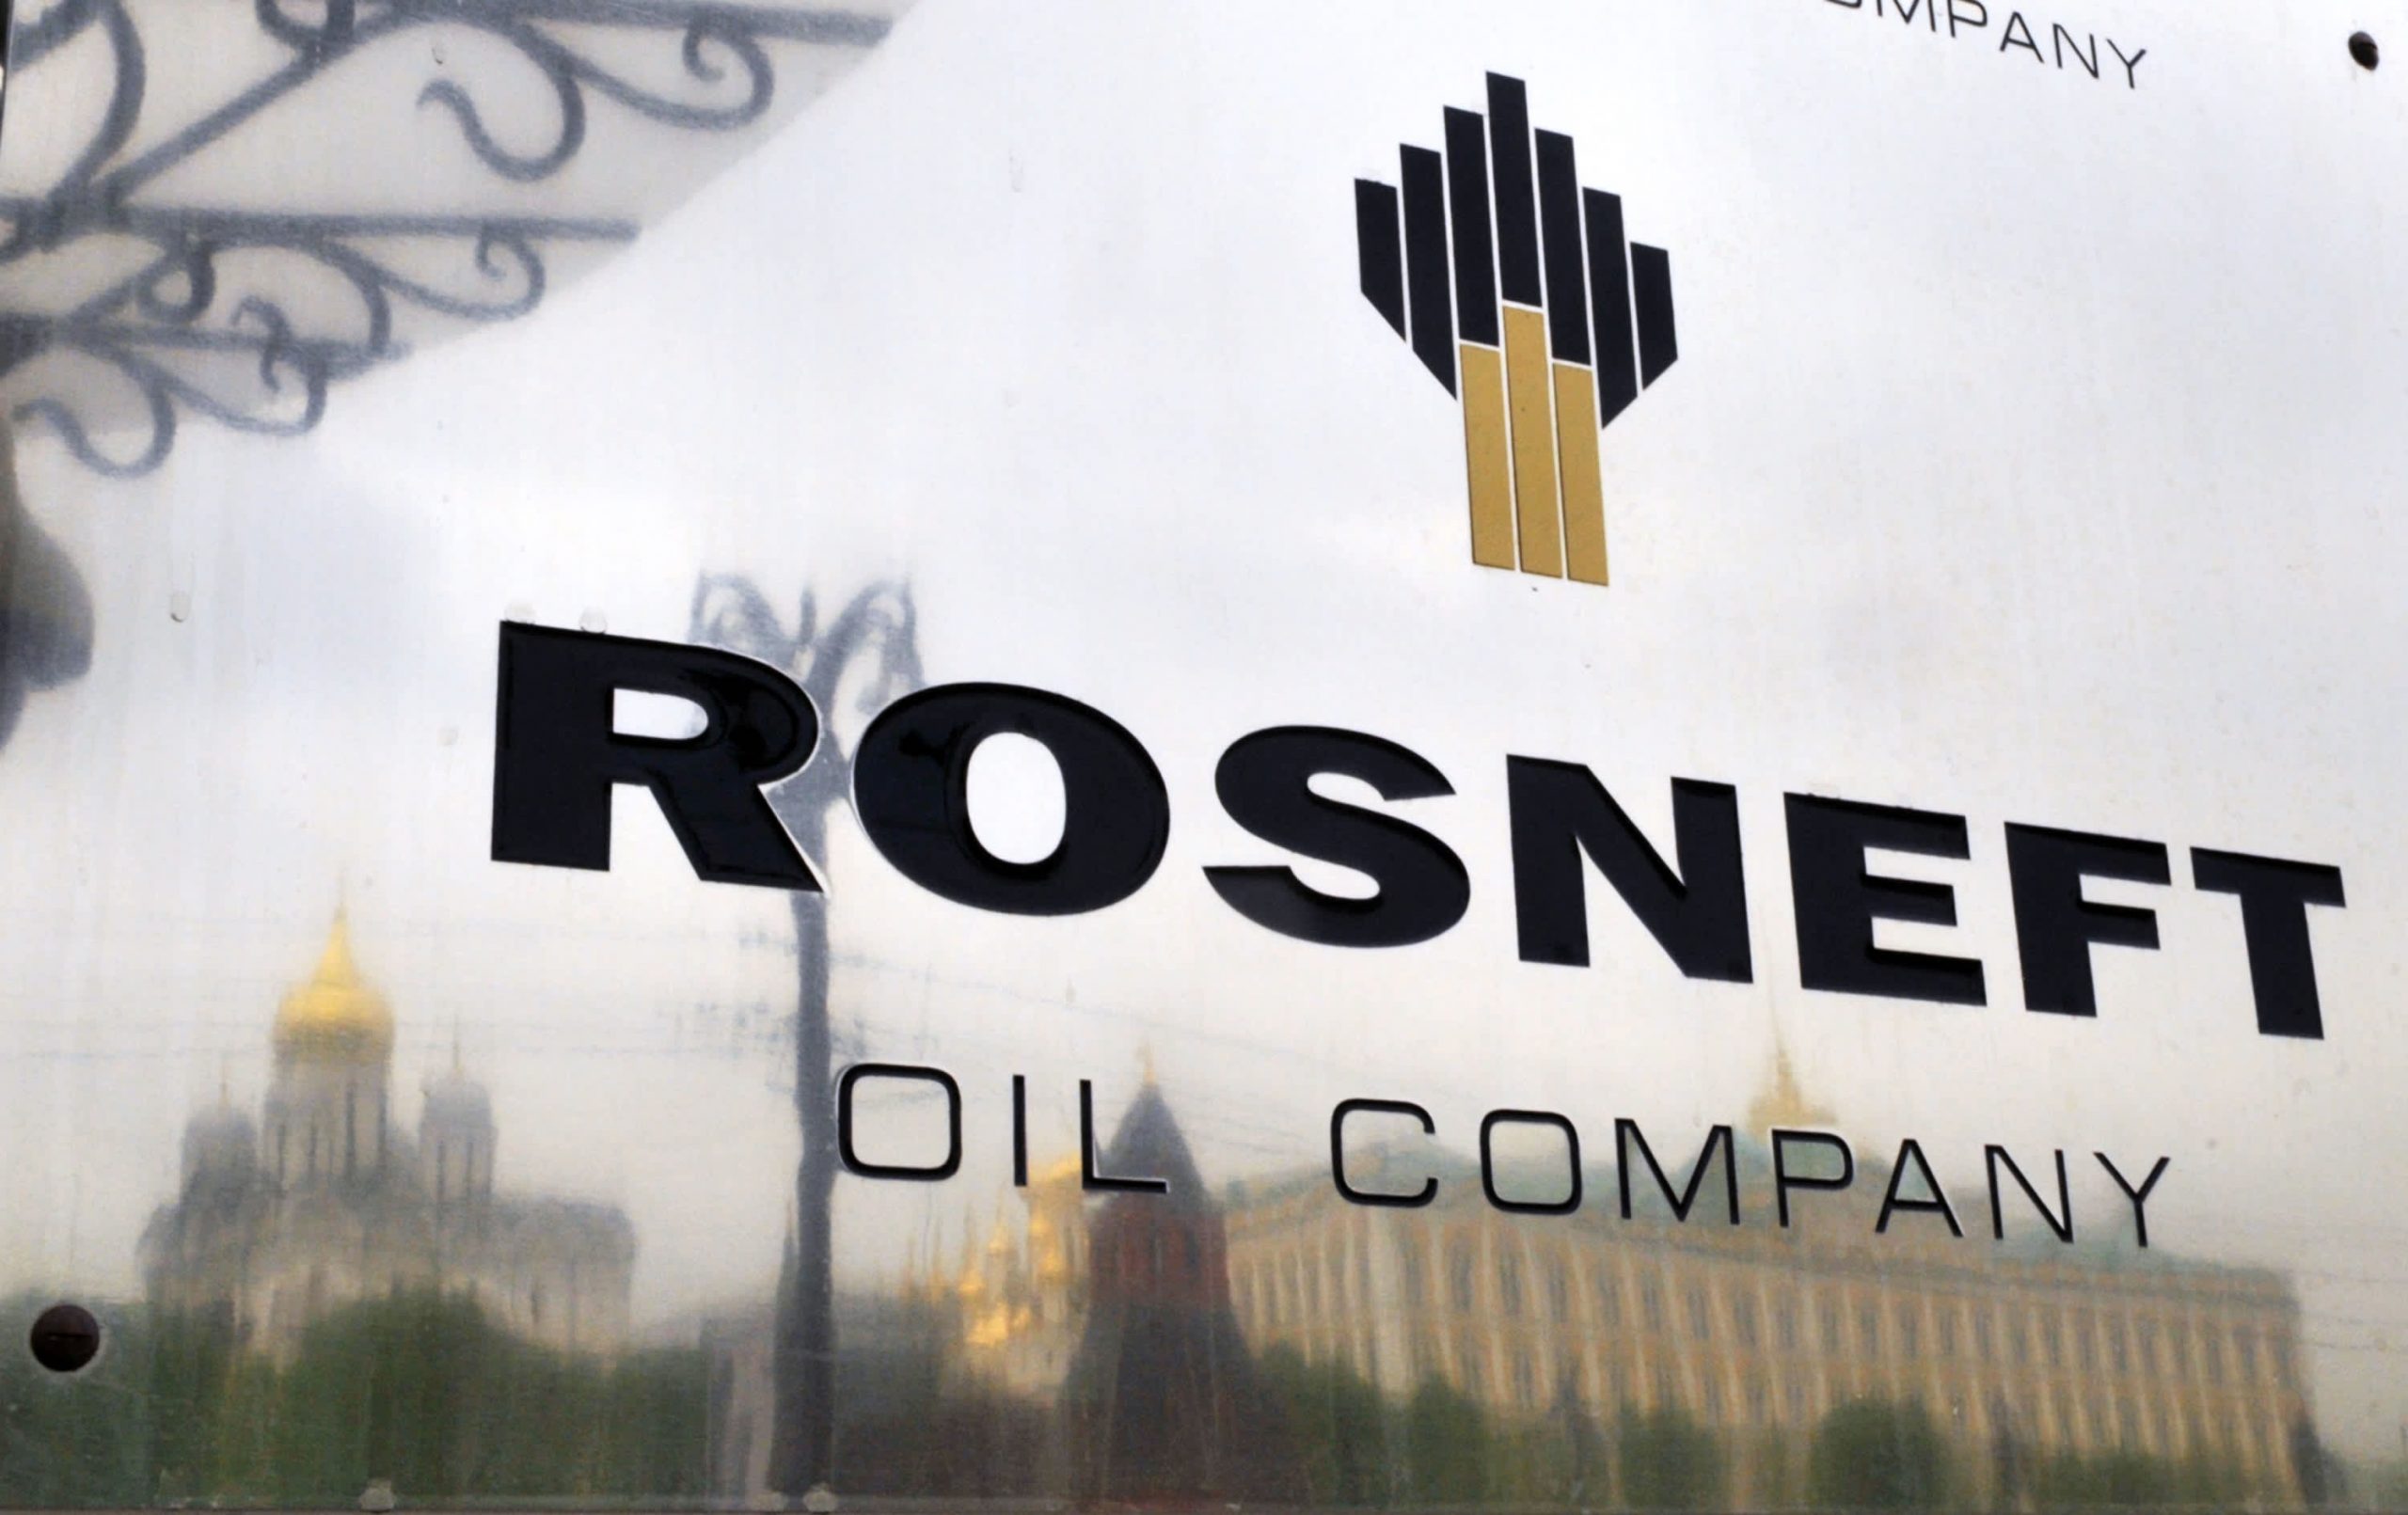 BP offloads its nearly 20% stake in Russia’s Rosneft